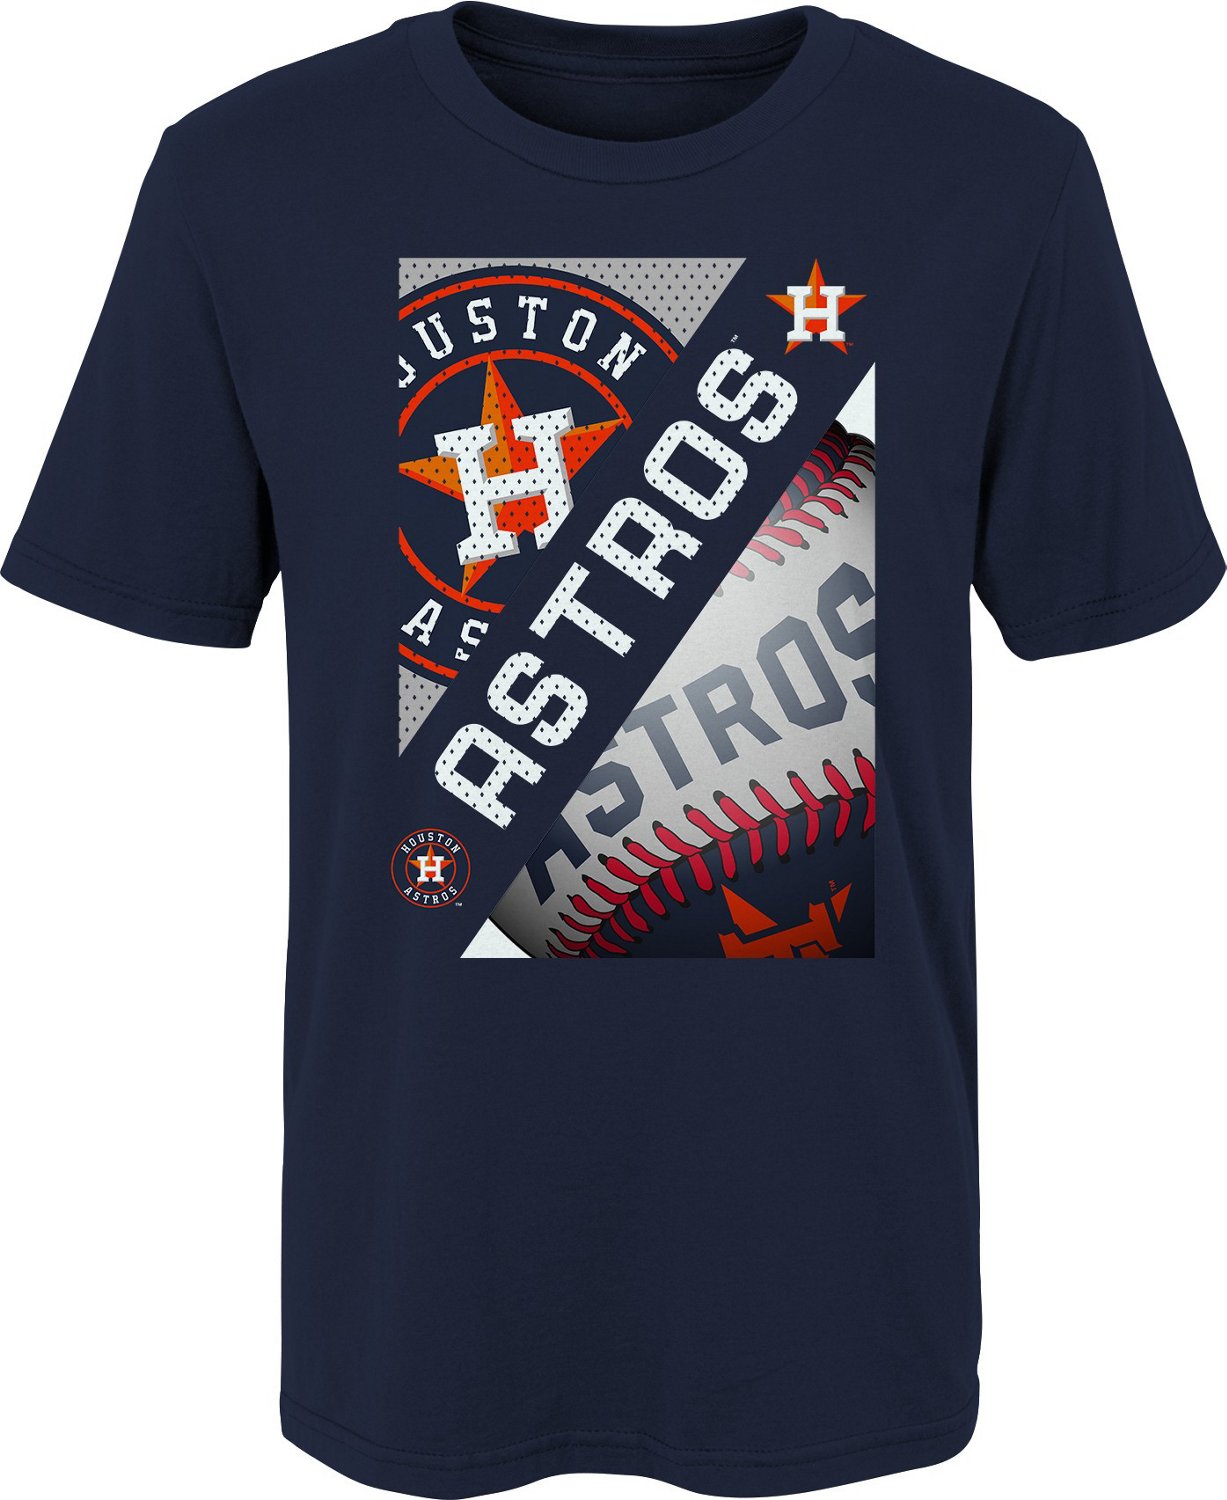 Outerstuff Boys' Houston Astros Right Fielder Graphic T-shirt